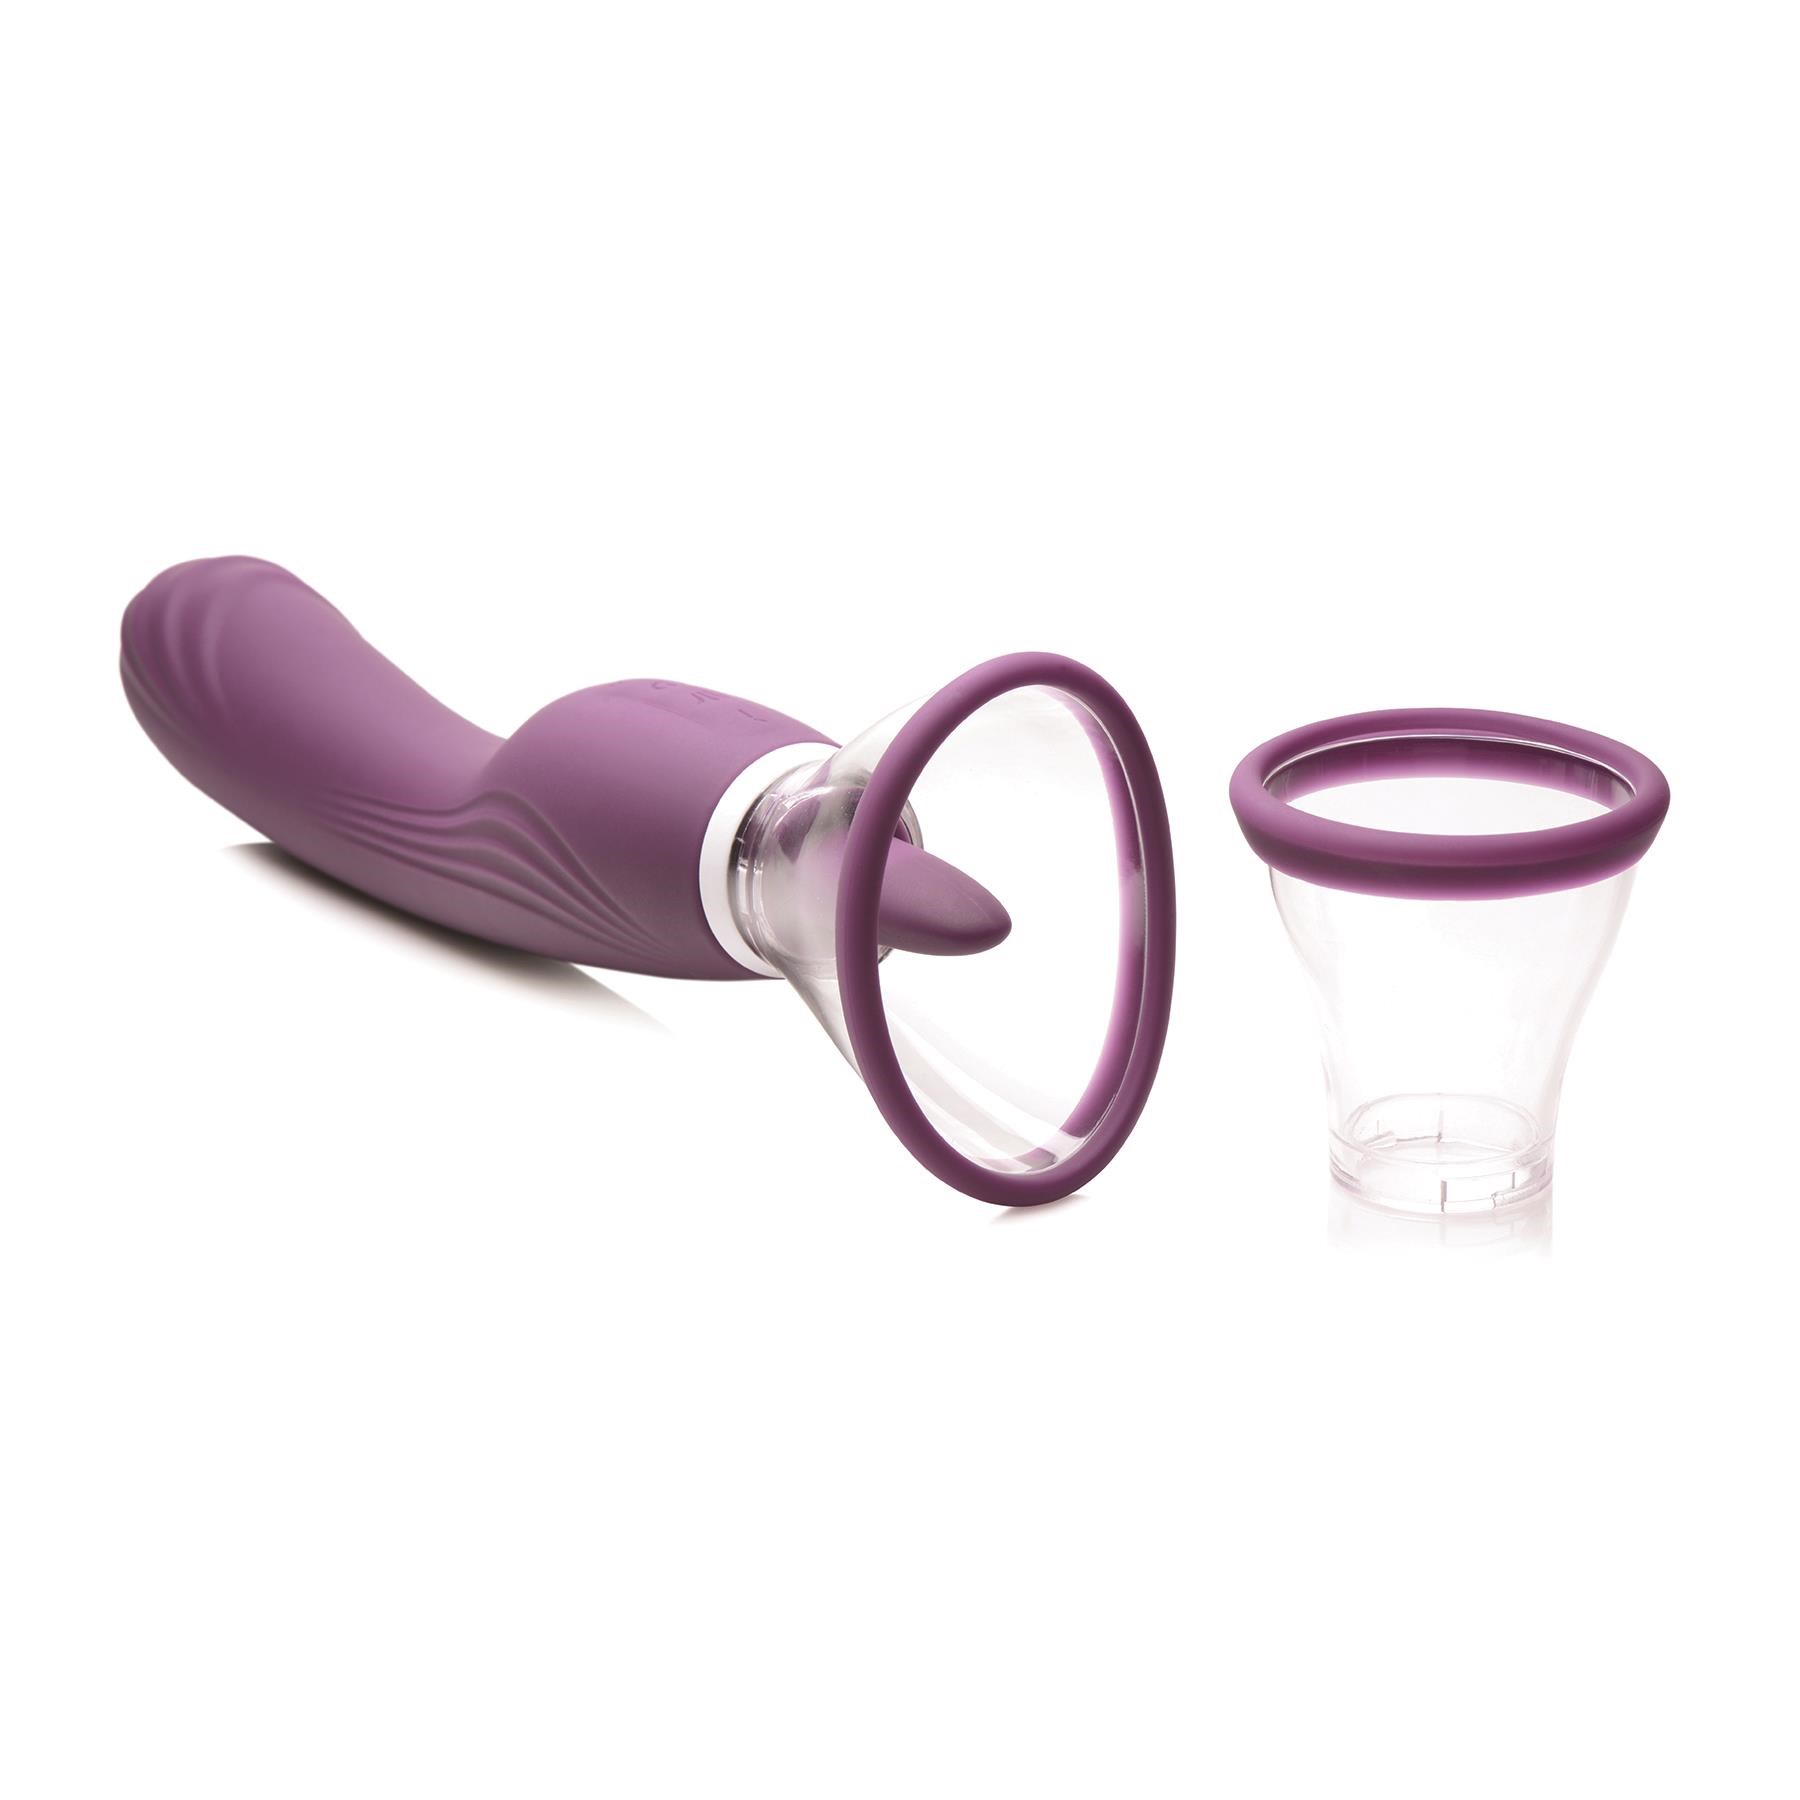 Shegasm Lickgasm Vibrating Pussy Pump with Product and Cups #1